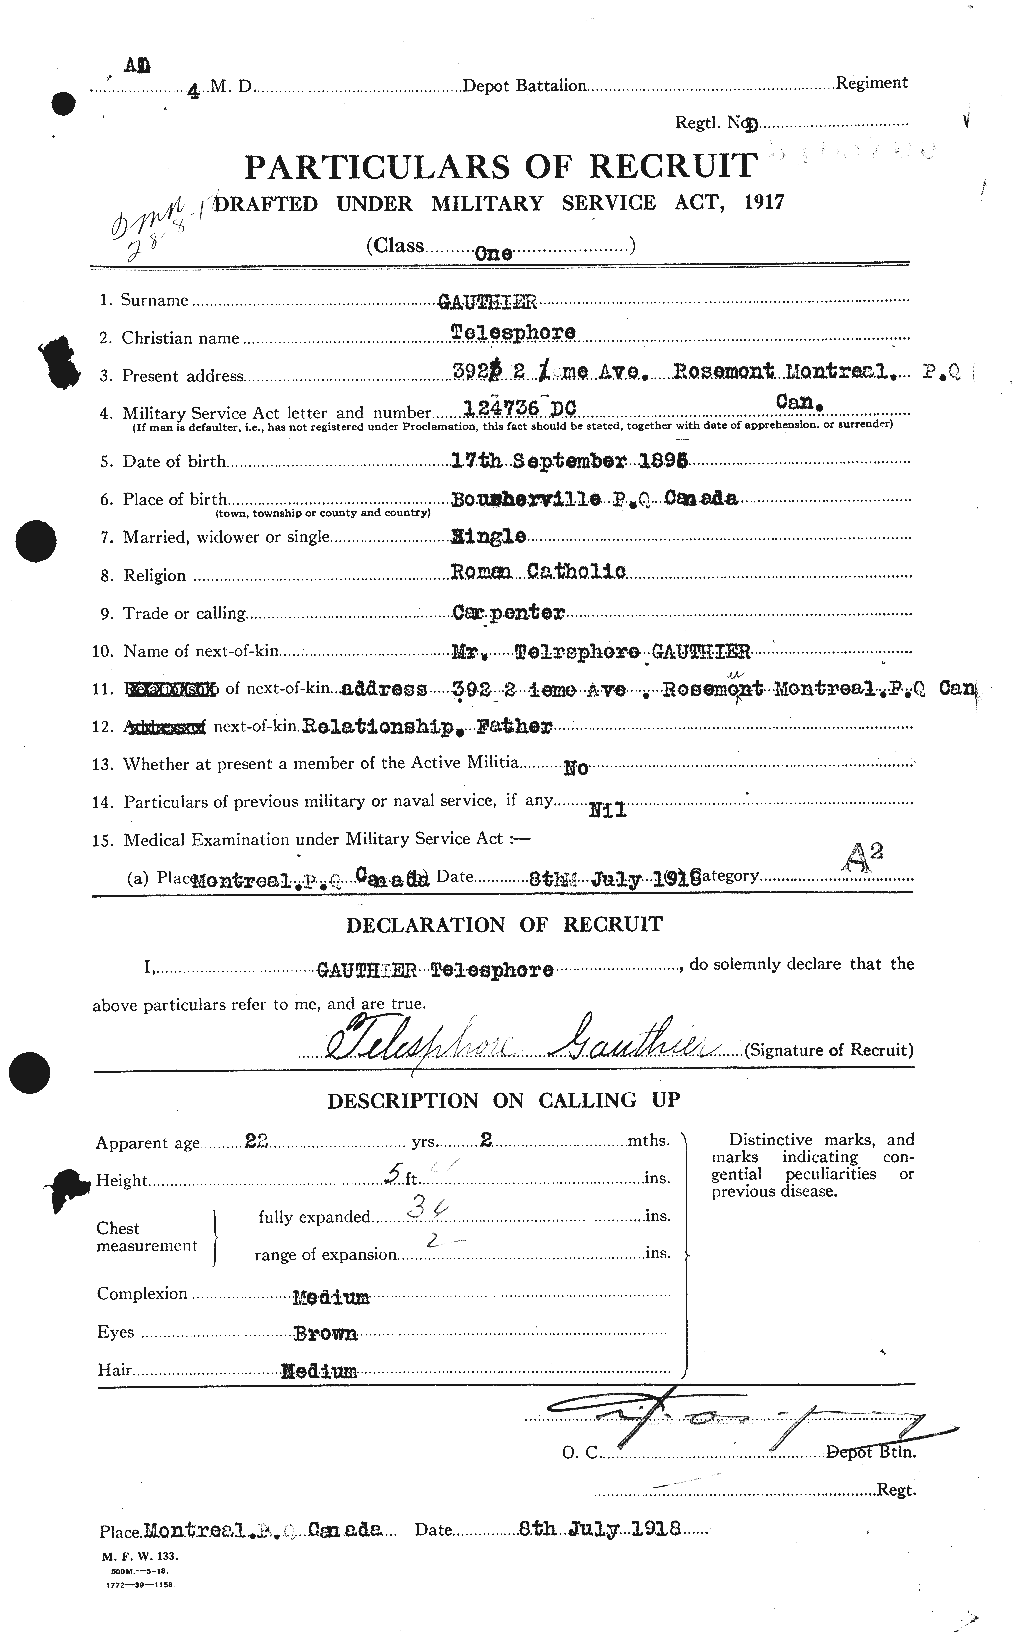 Personnel Records of the First World War - CEF 343012a